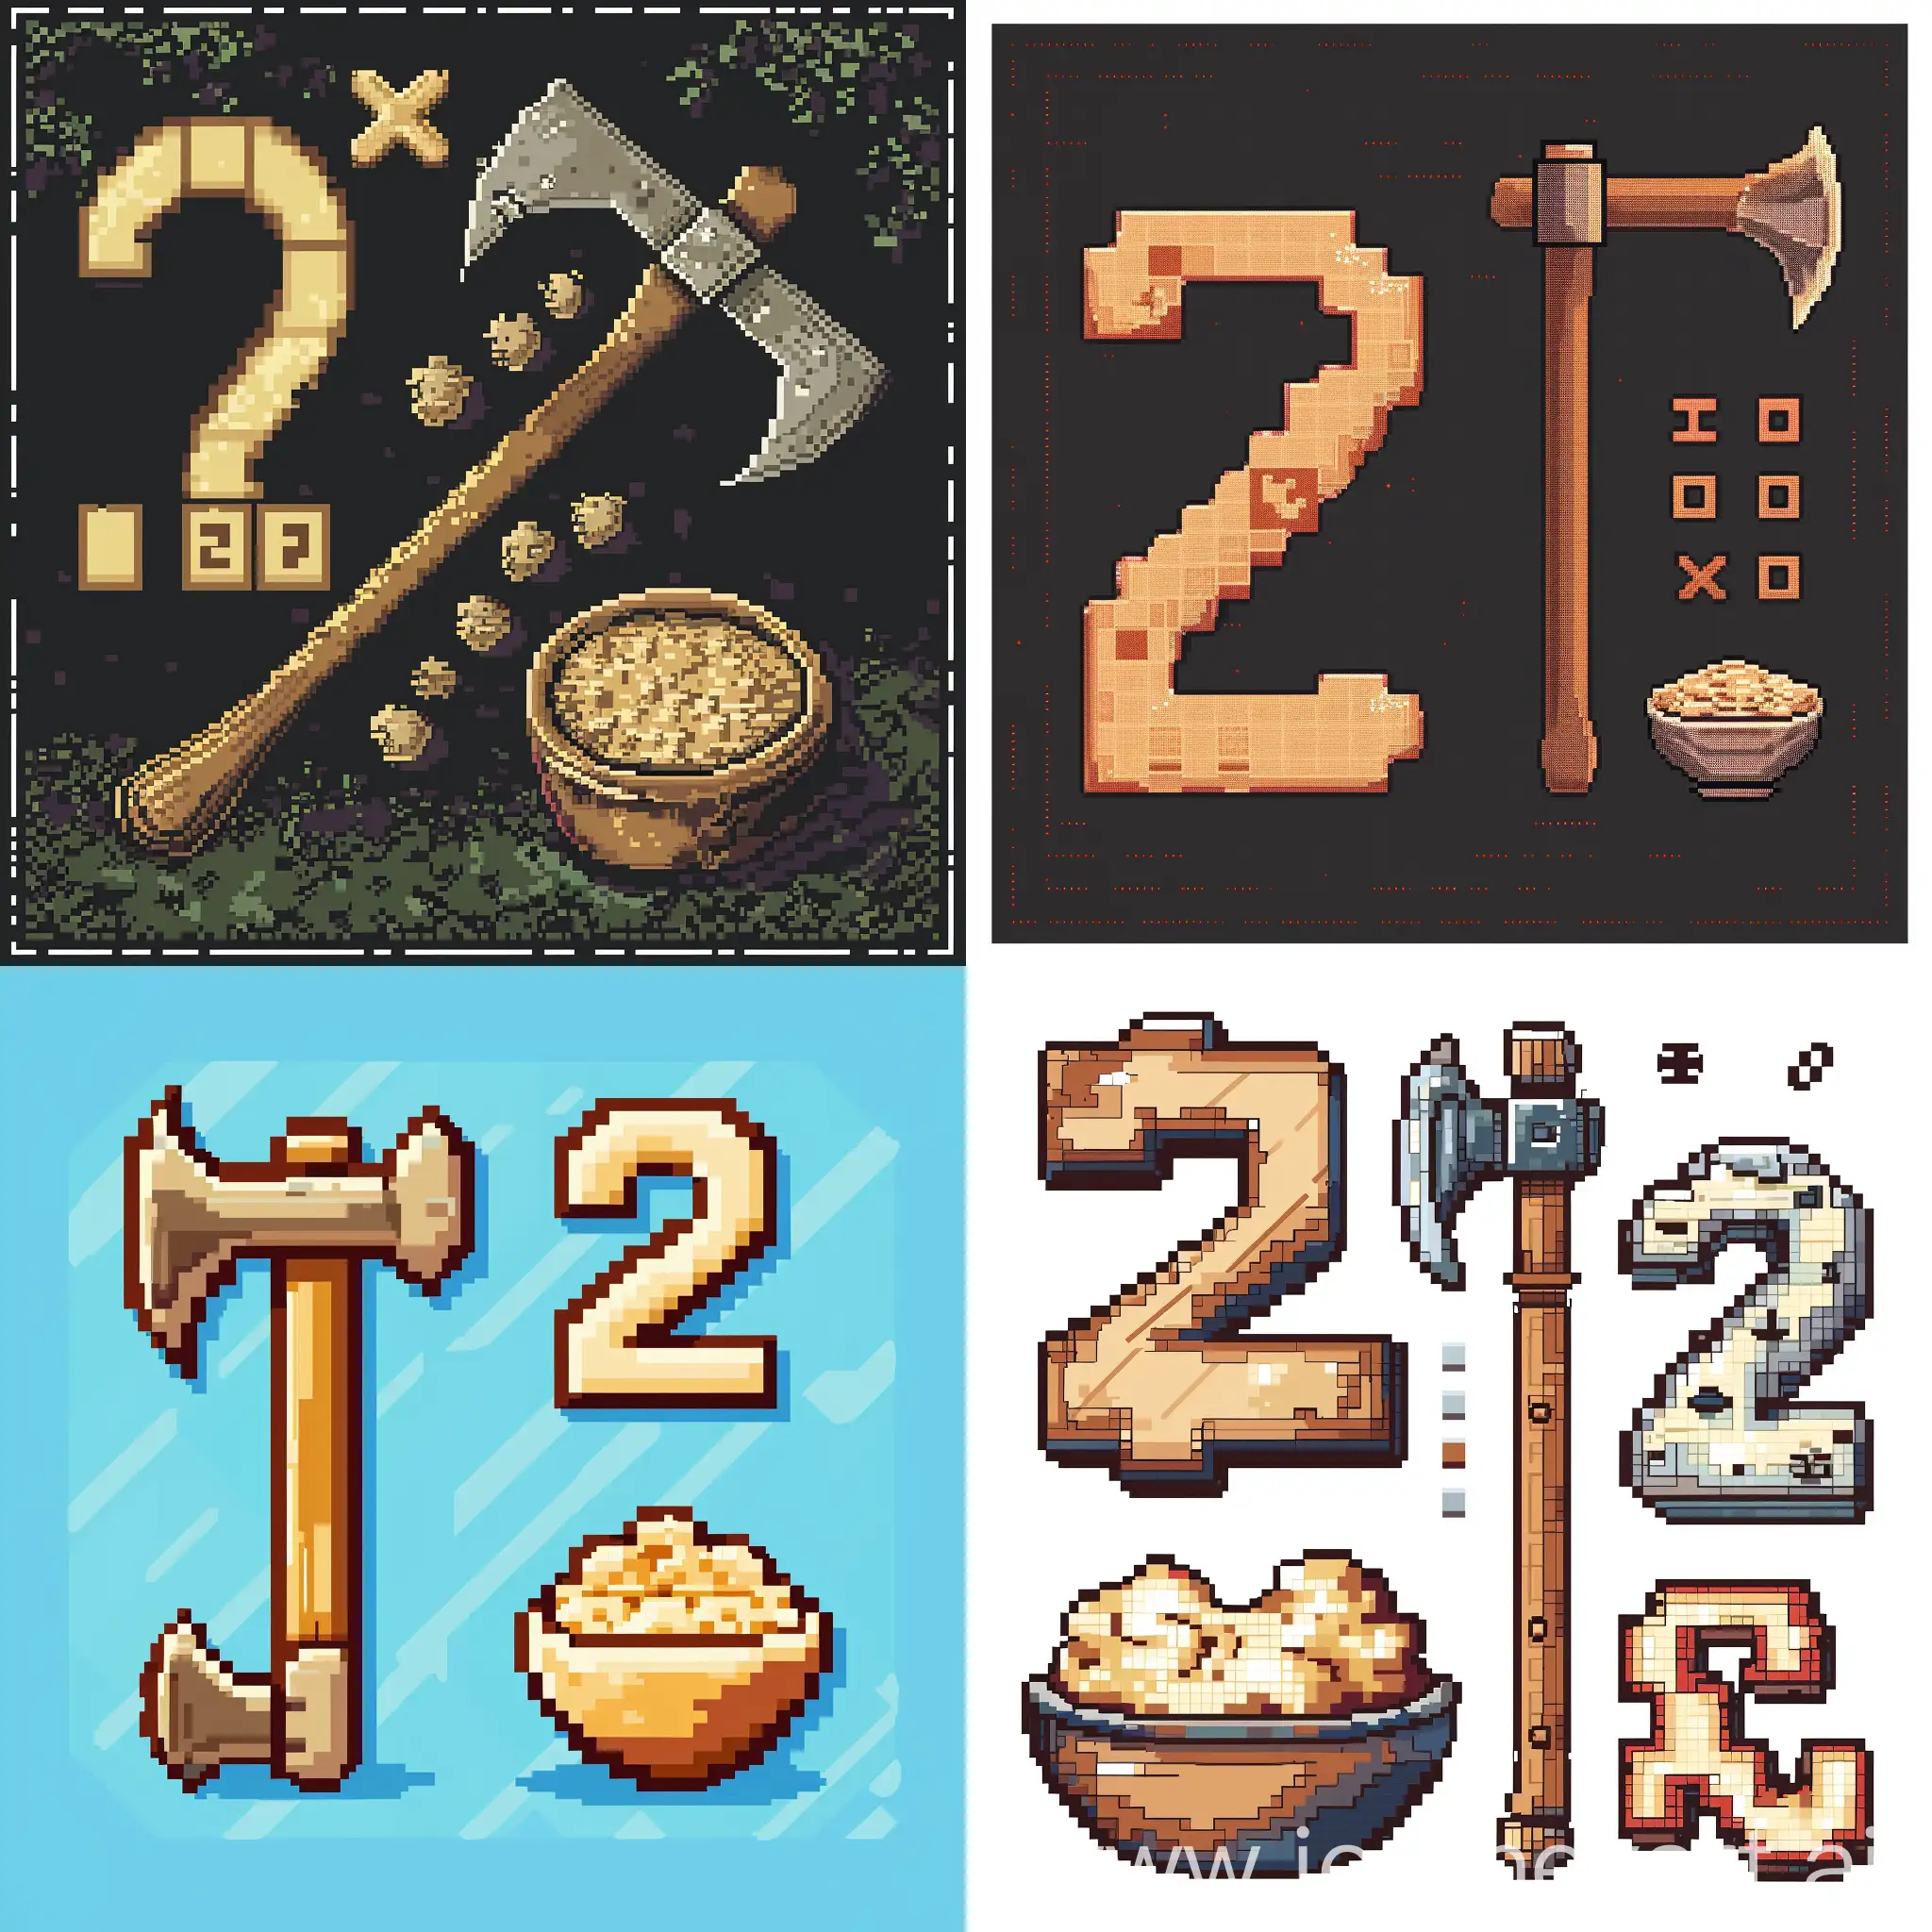 Pixel-Art-Equation-with-Axe-Porridge-Bowl-and-Question-Mark